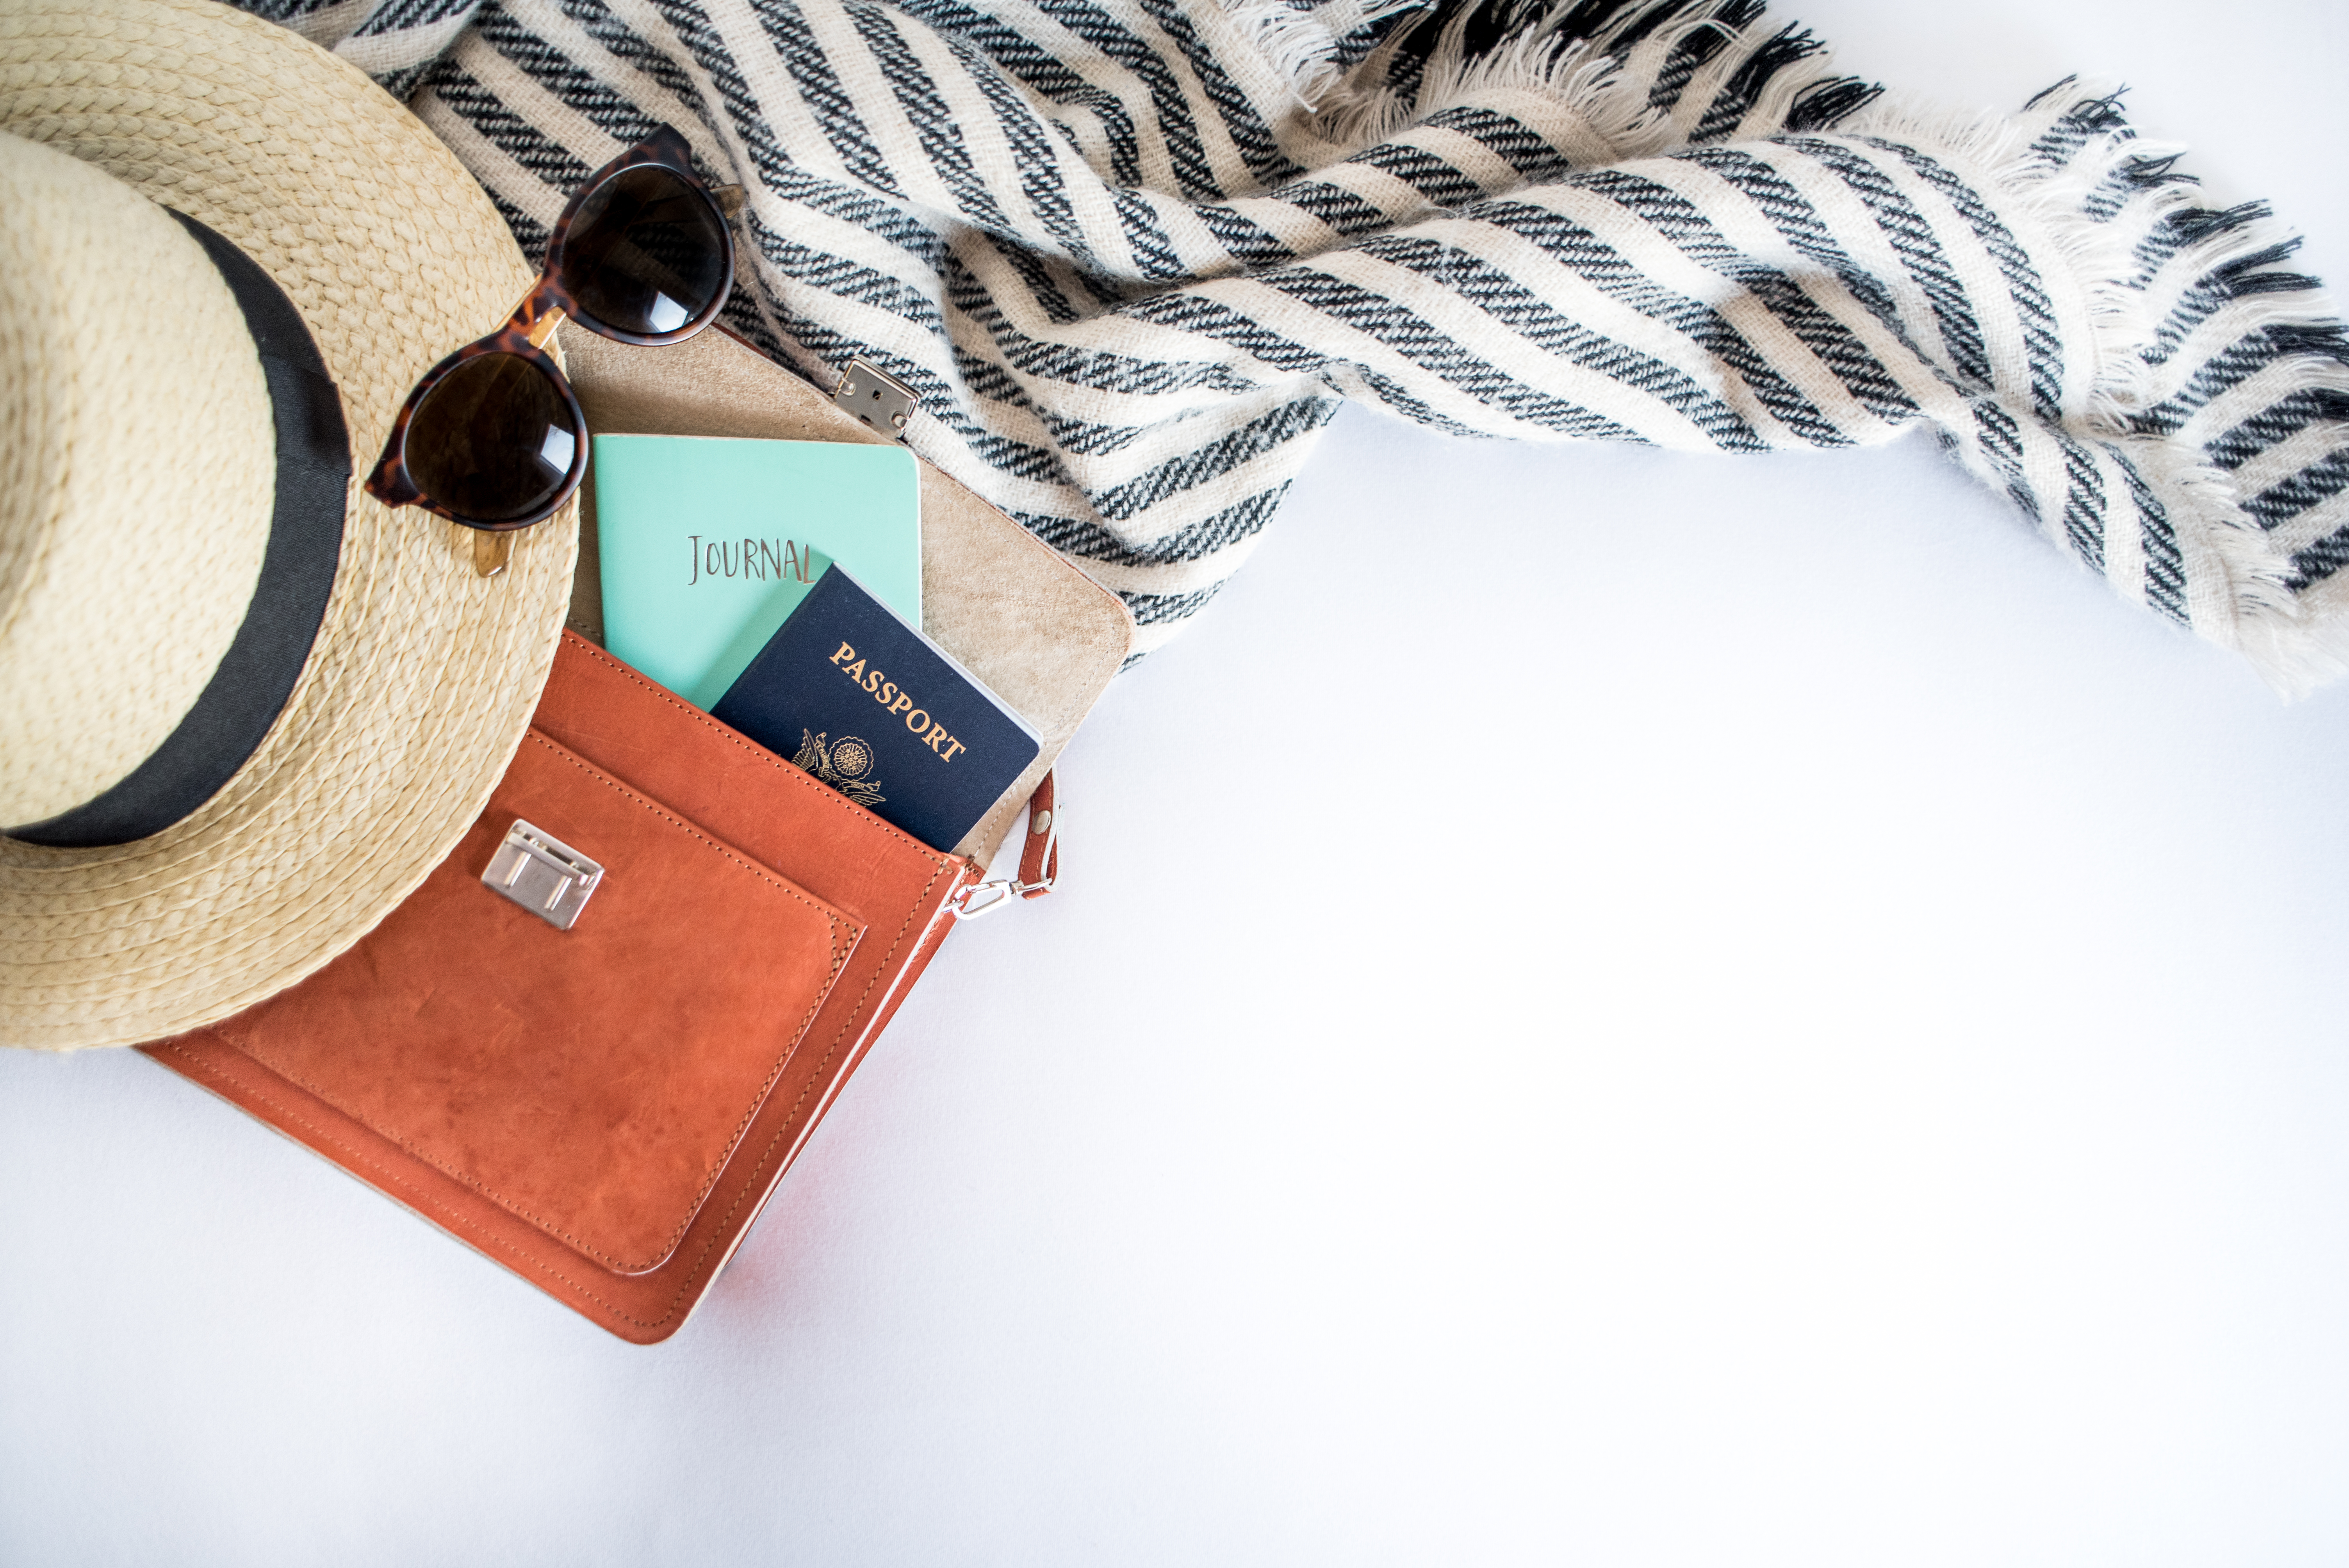 Straw sunhat, sunglasses, small leather travel bag with passport and travel documents, and a scarf.